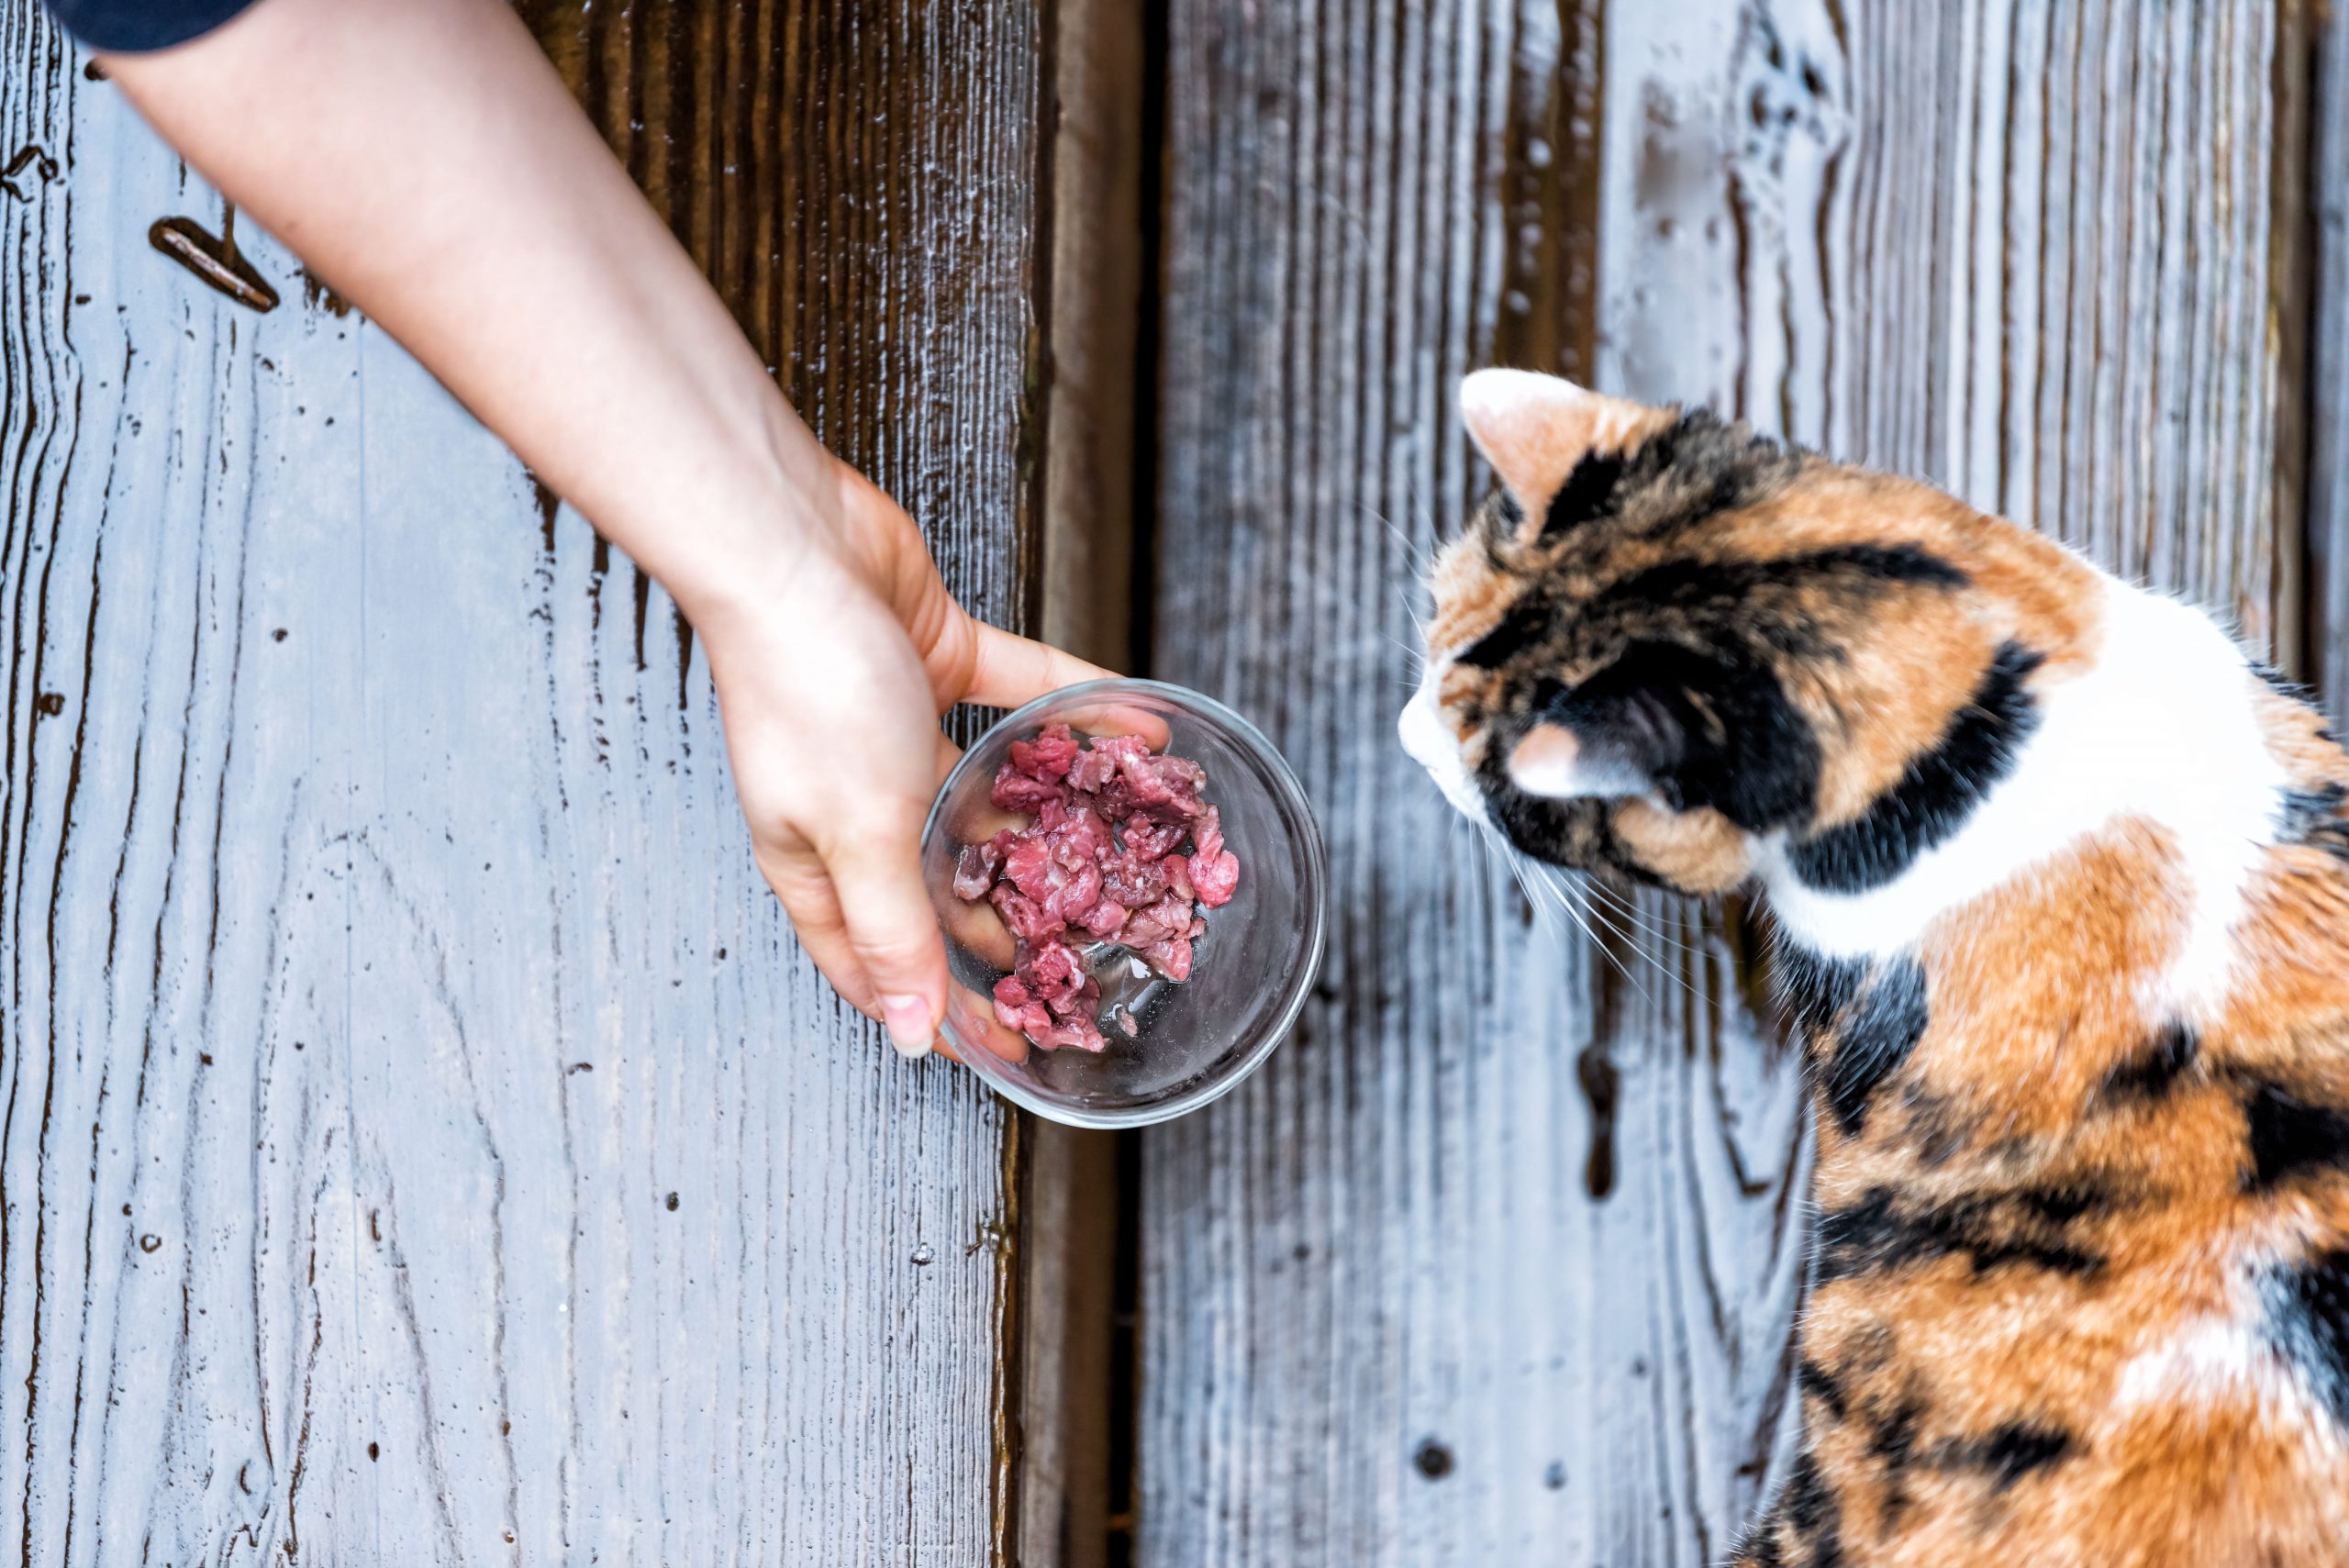 Should You Feed Stray Cats?